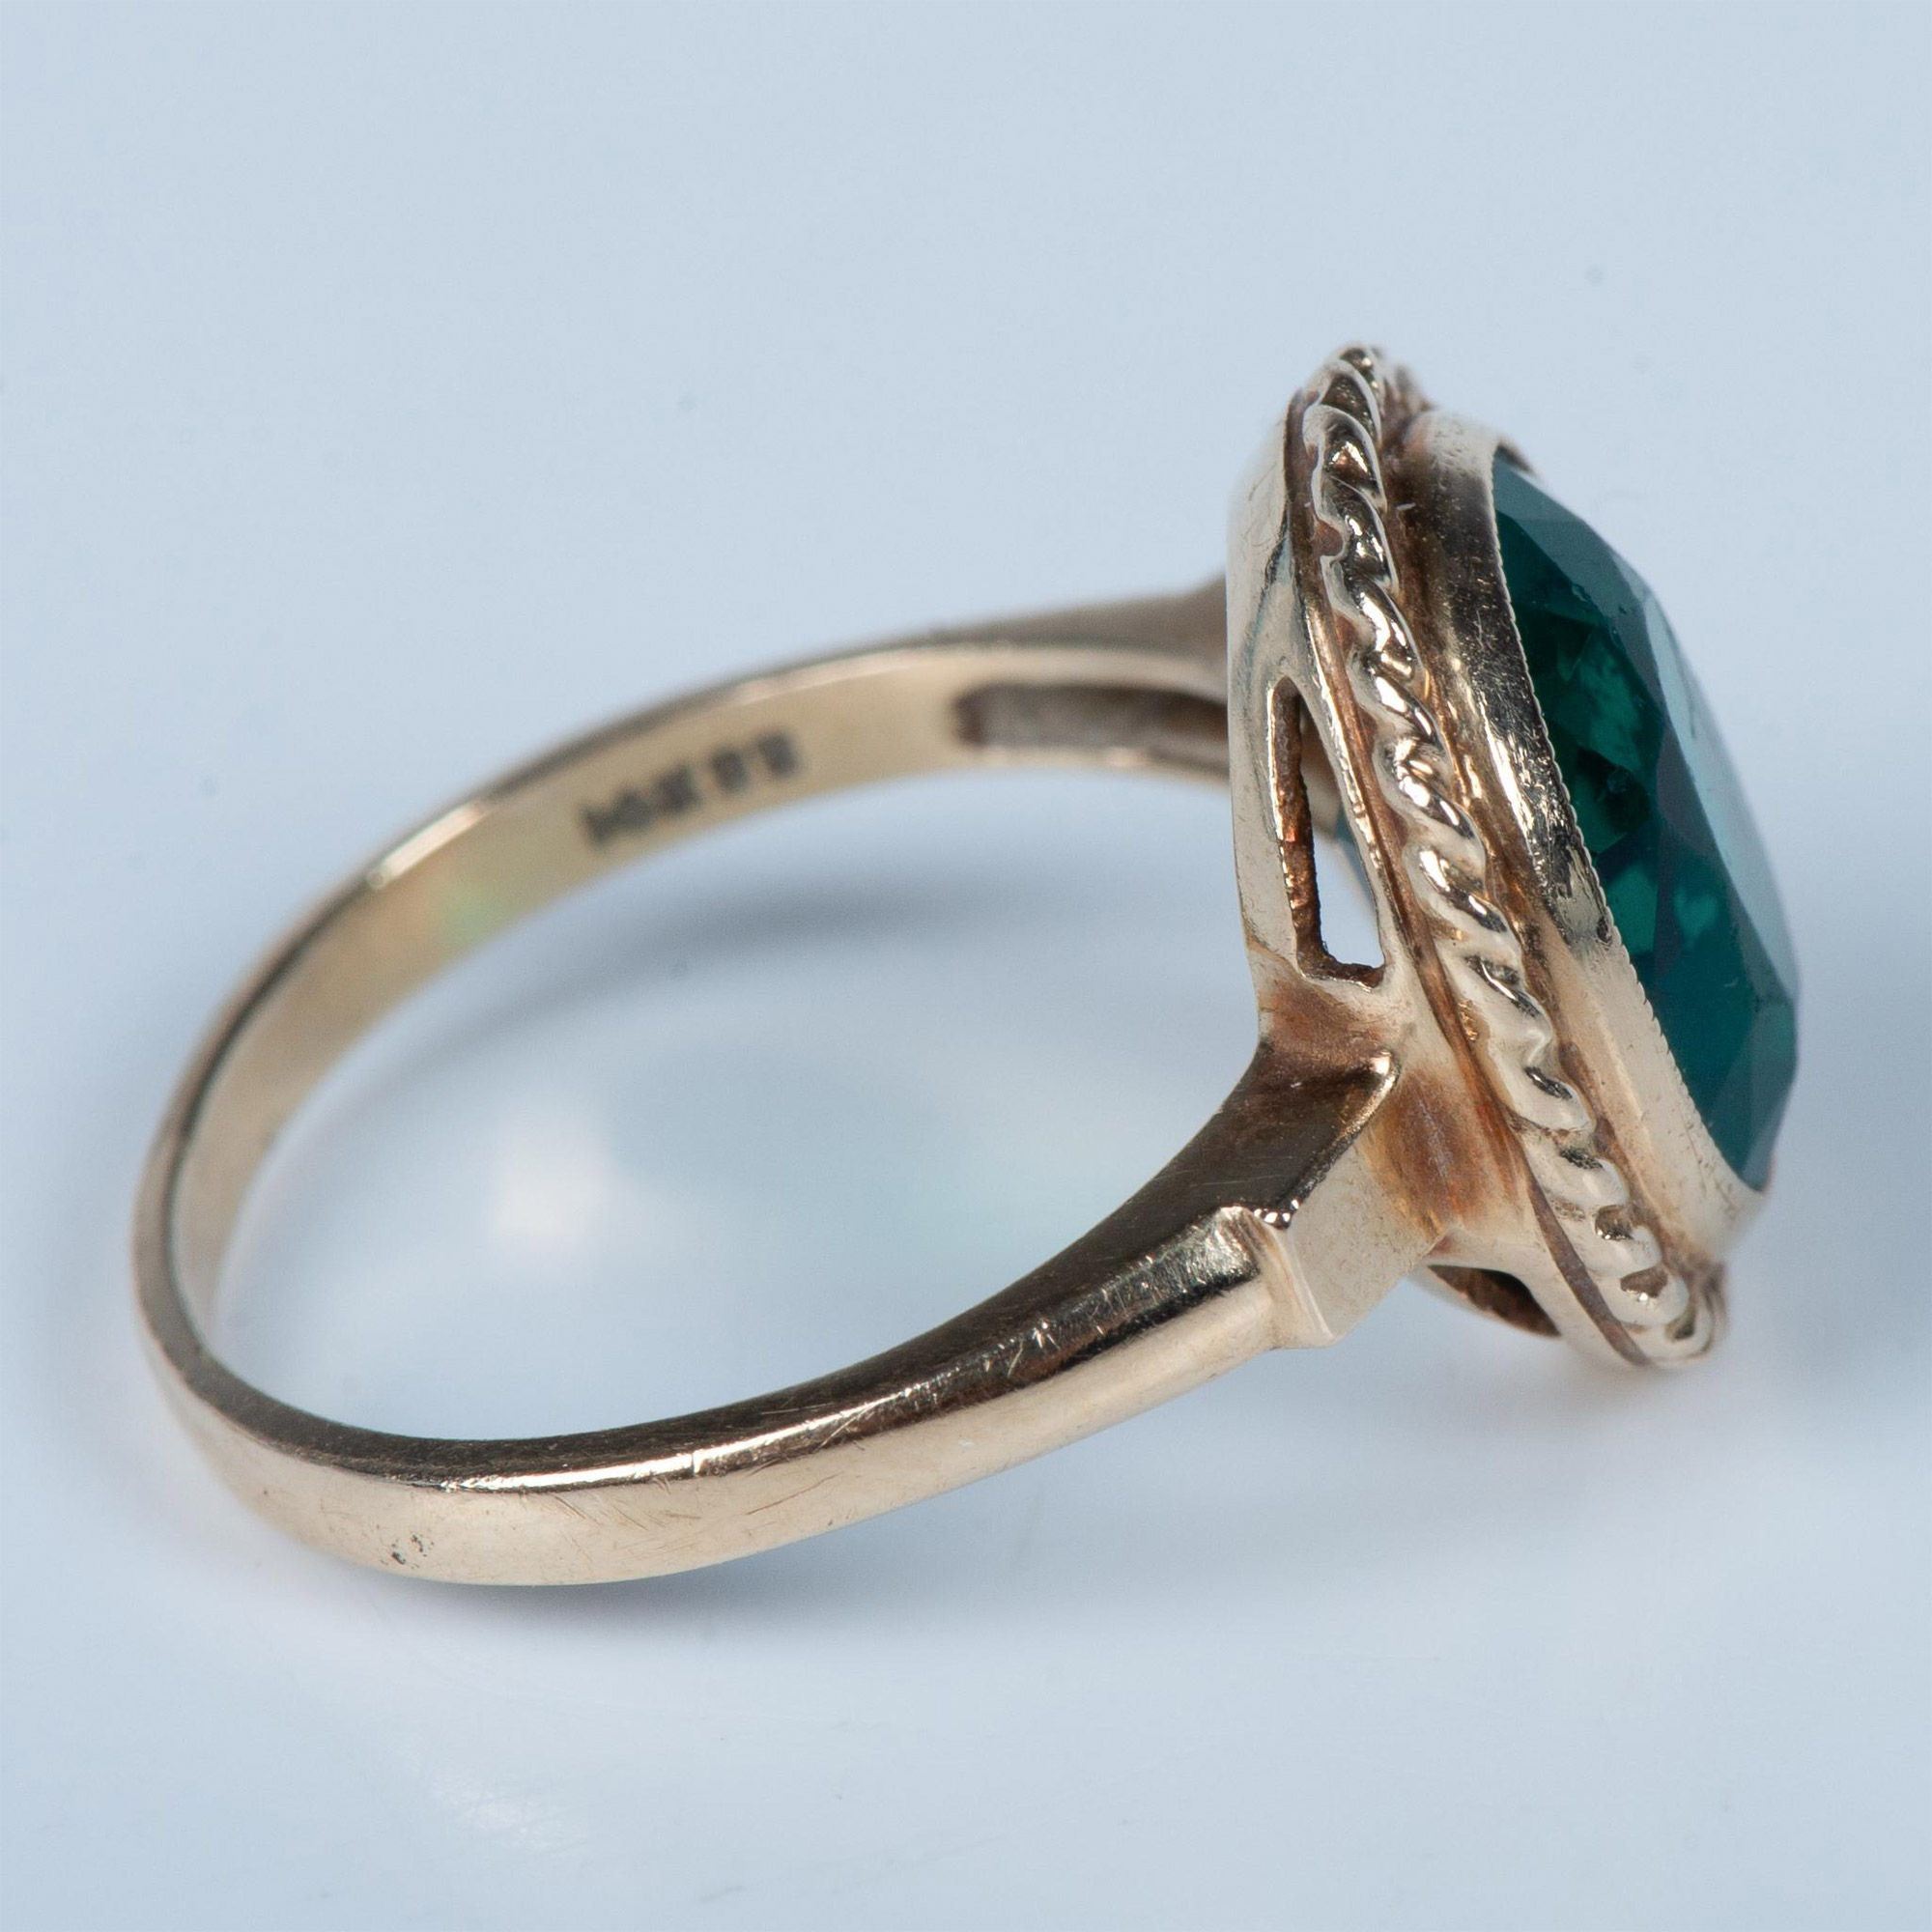 Gold Ring with Large Green Stone - Image 3 of 6